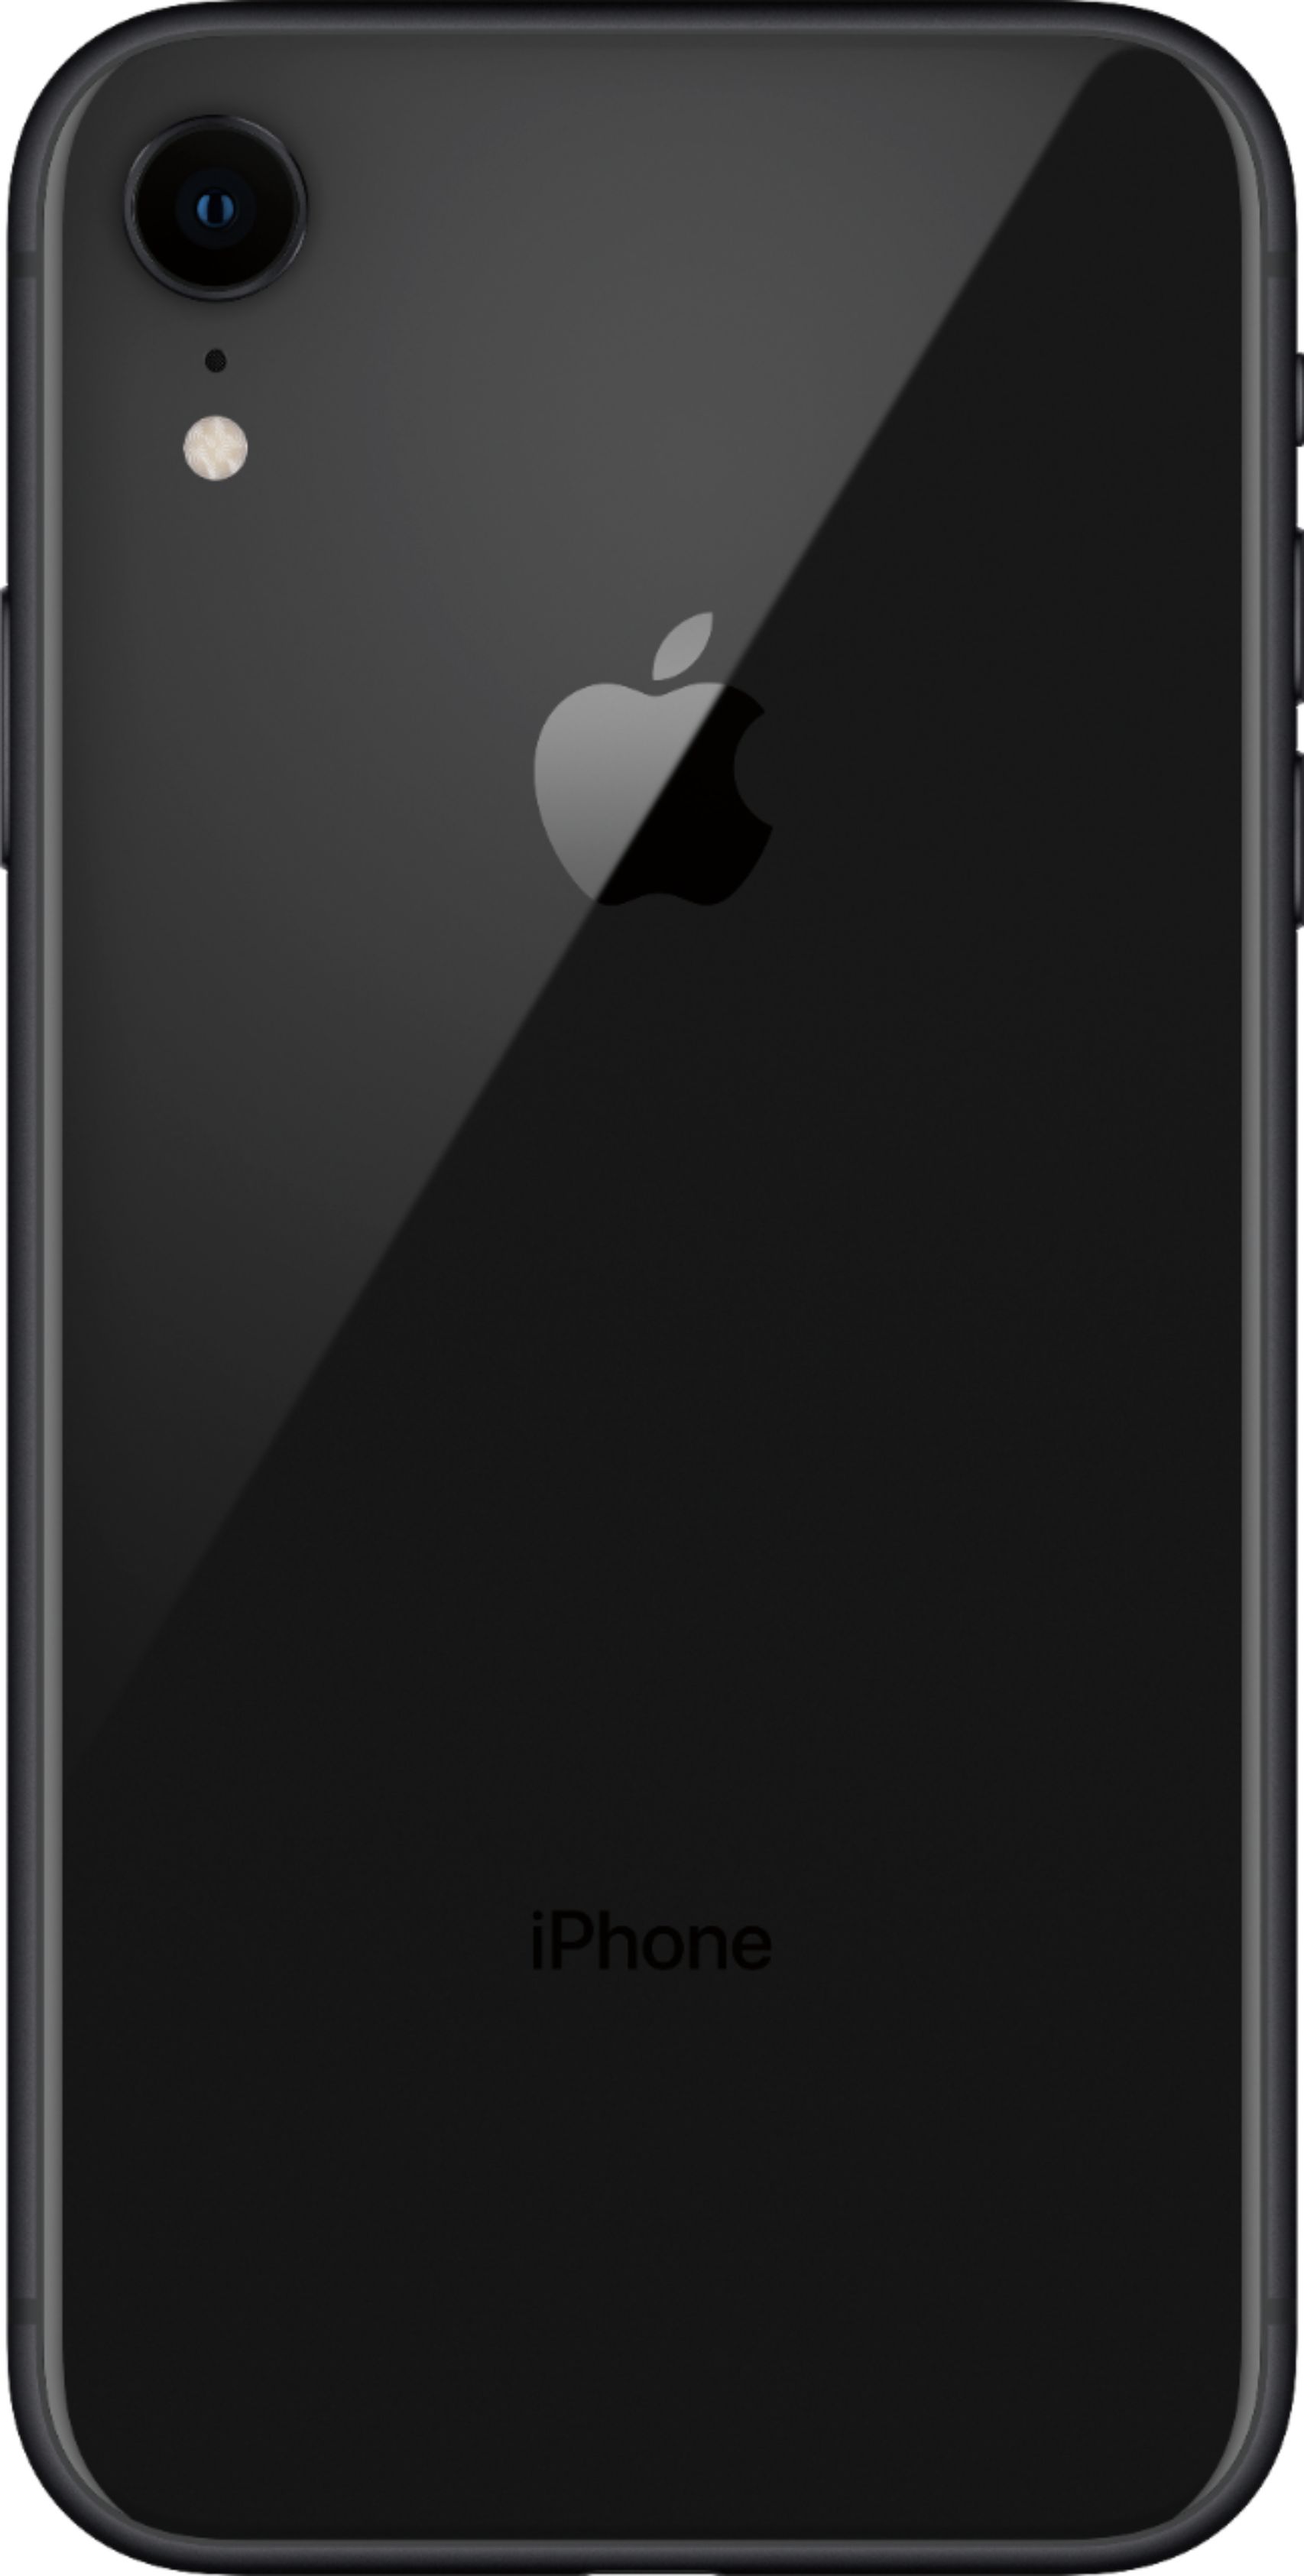 Back View: Apple - iPhone 11 Pro Max 256GB - Space Gray (AT&T)